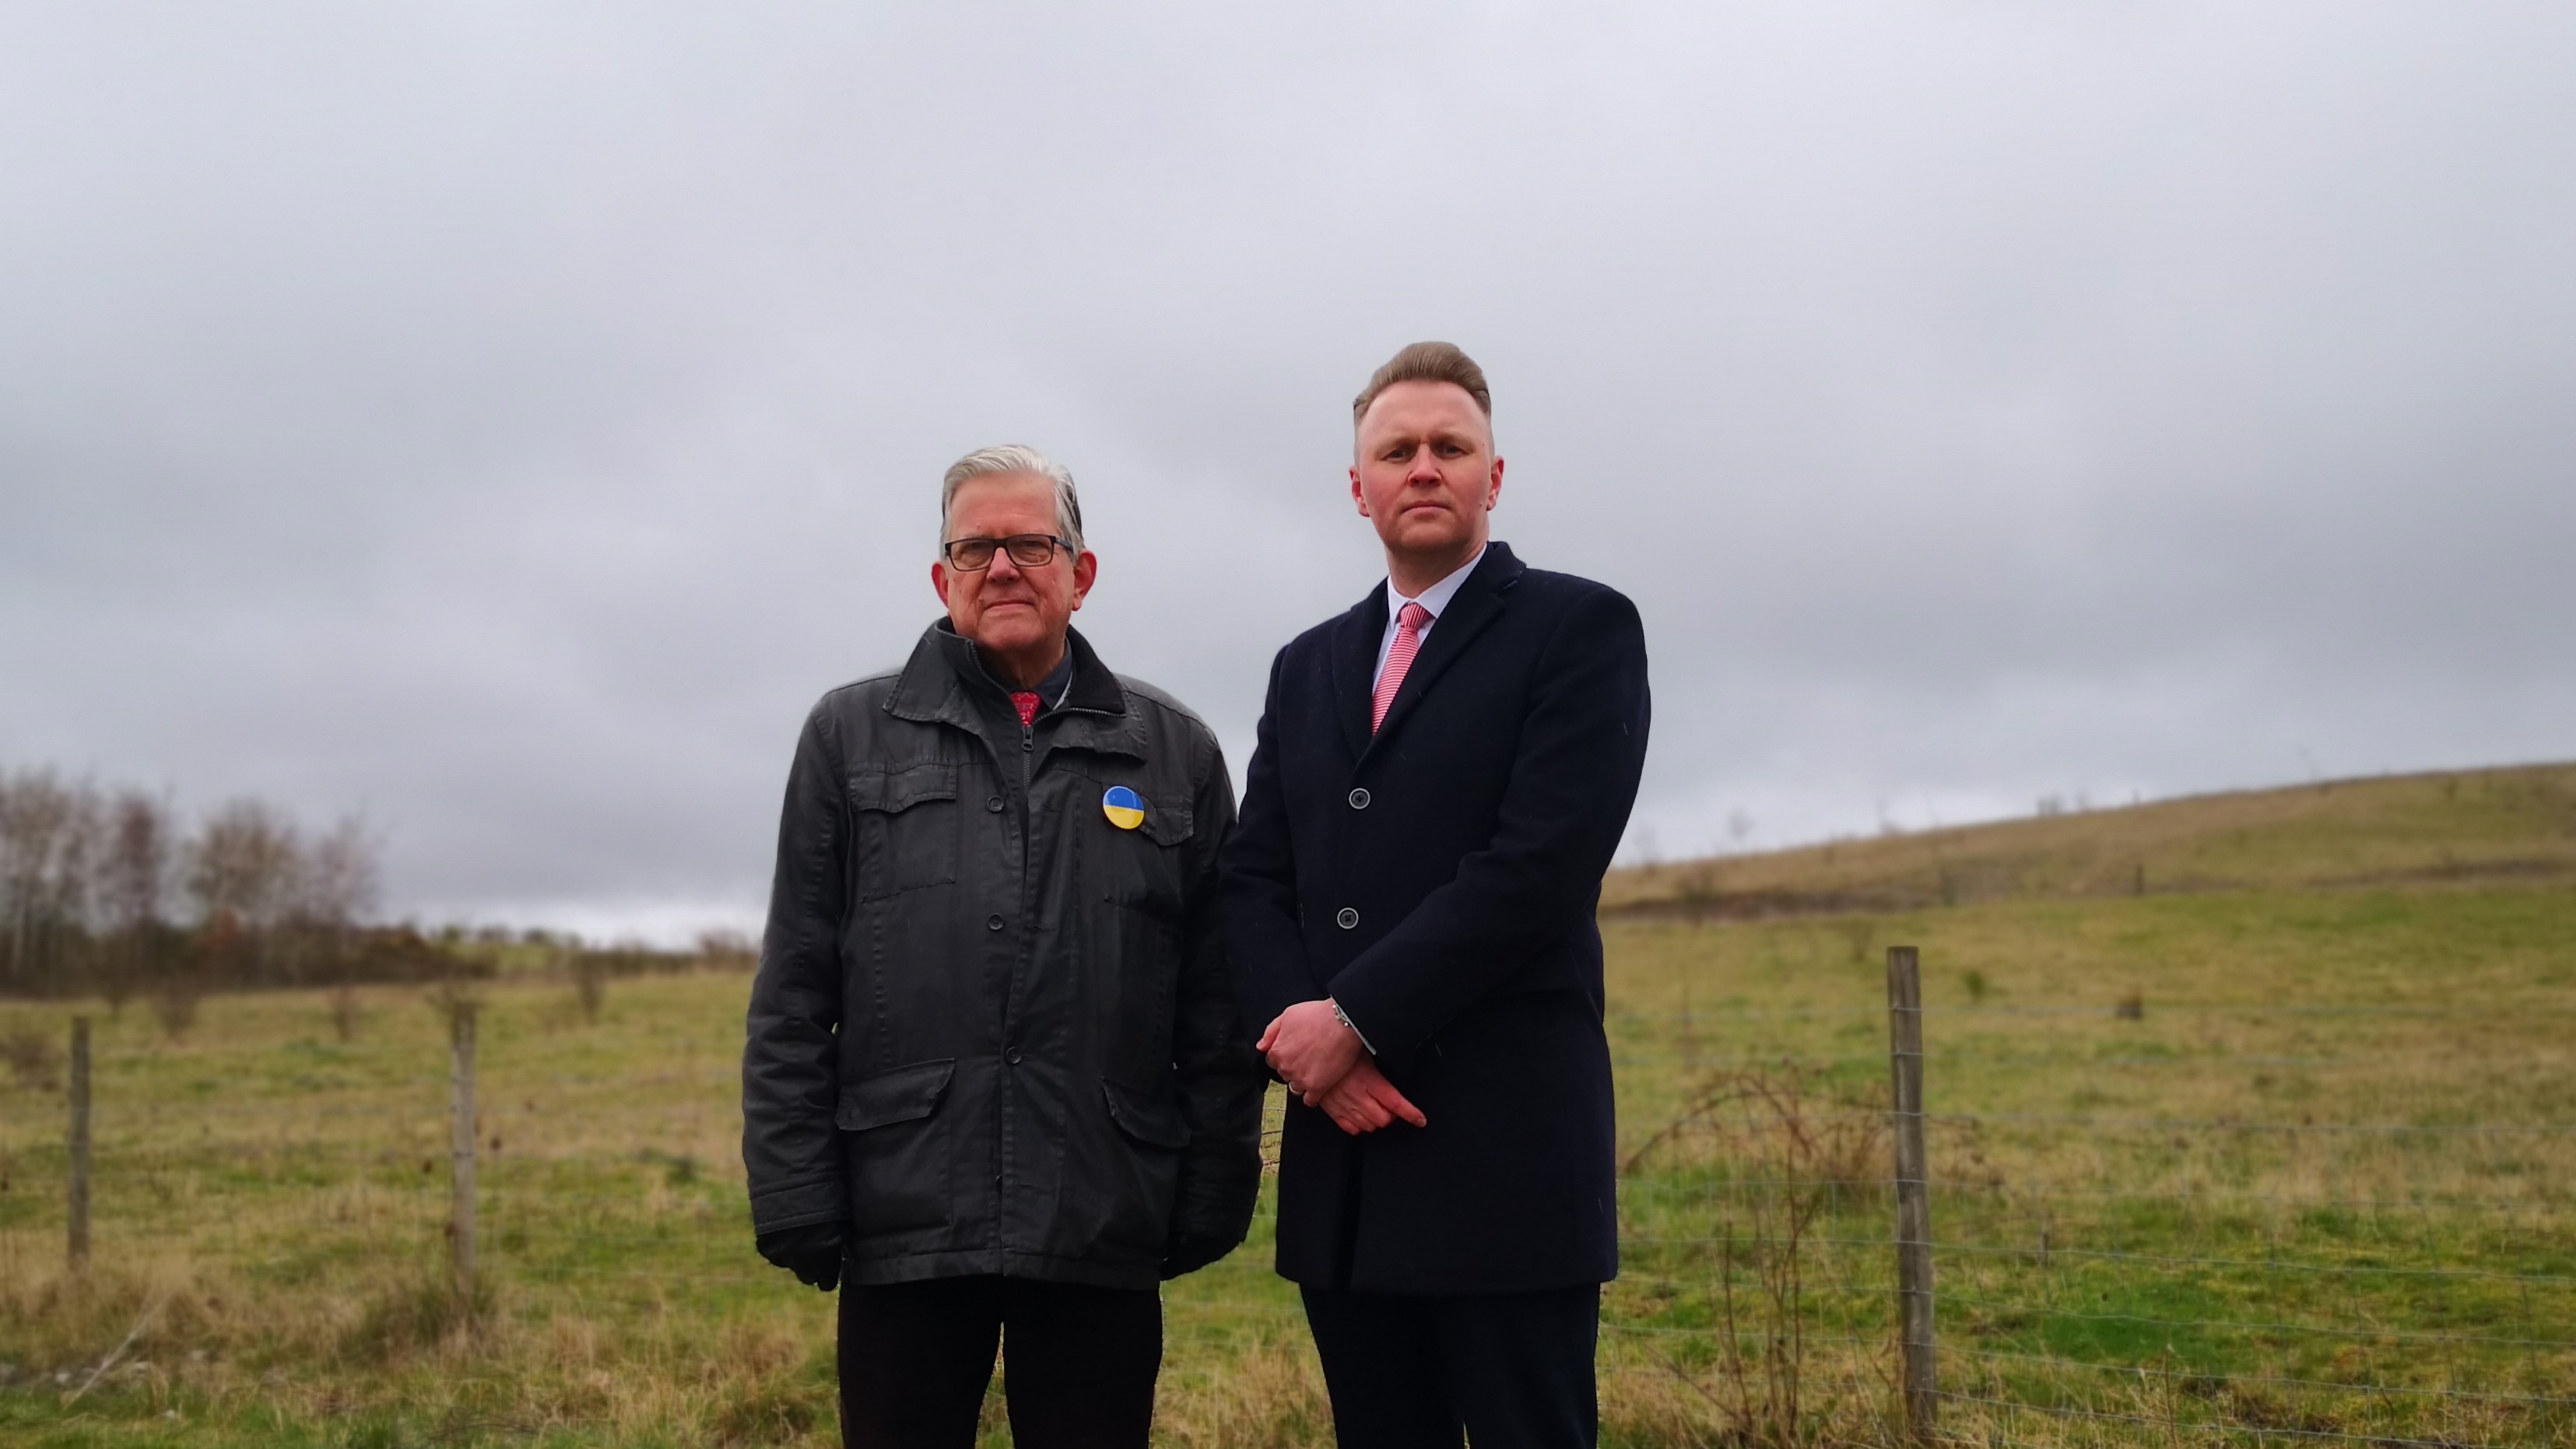 Councillor John Clarke MBE and Councillor Michael Payne stood in front of a field at Gedling Country Park which will become a new Holocaust Memorial Garden